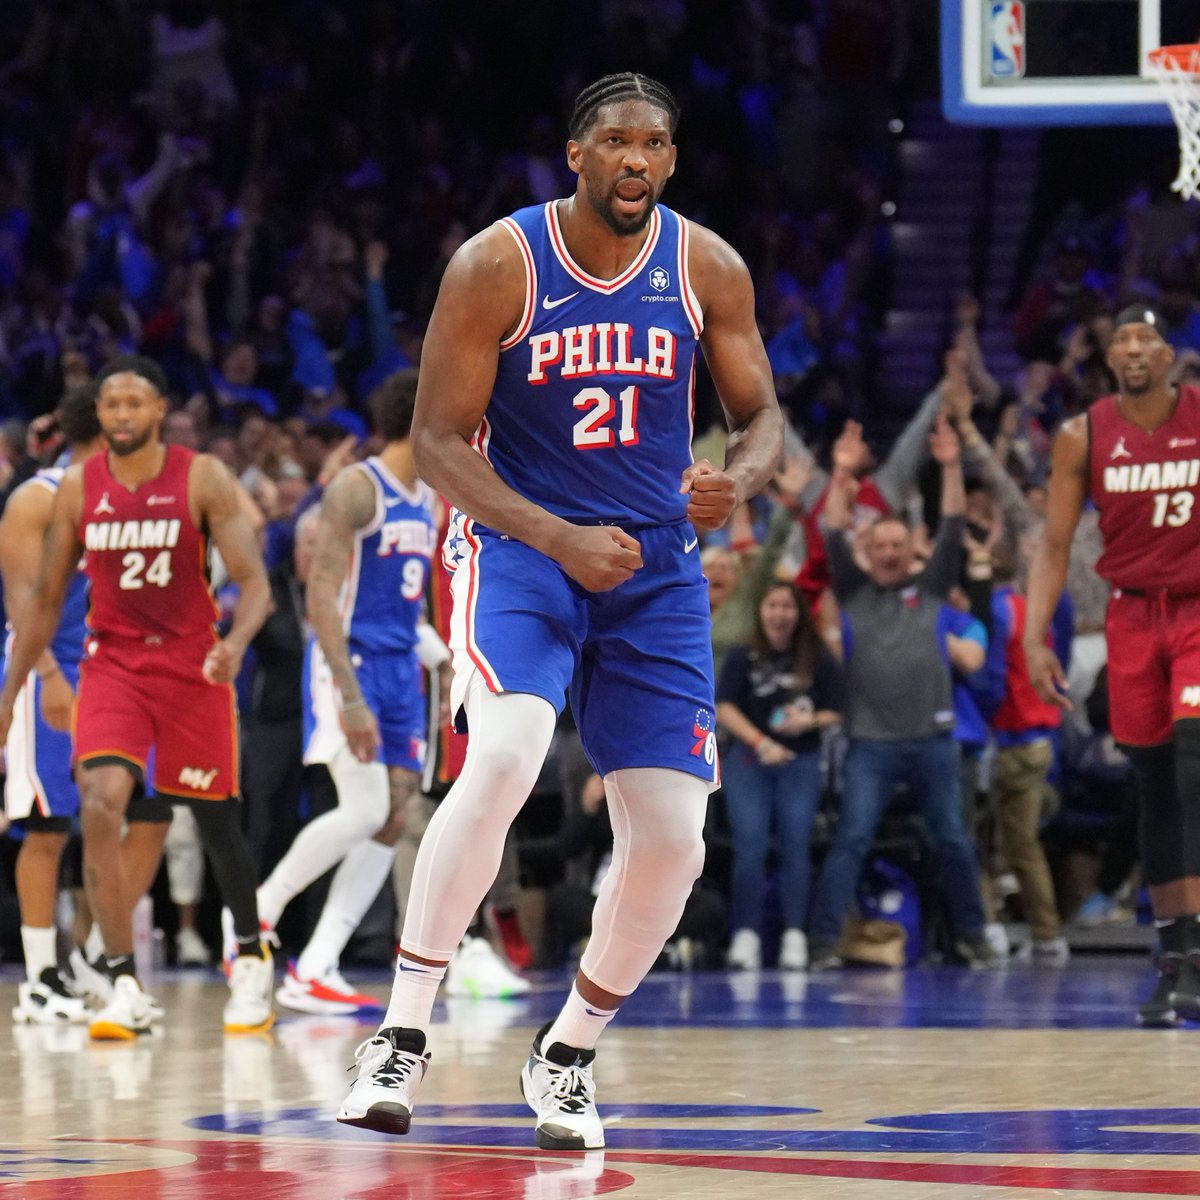 What a massive victory for the Sixers to lock in the easier round 1 matchup vs. New York instead of Boston. And on this side of the bracket, the Sixers could end up facing Indiana in round 2 with Giannis possibly out. This has to be the year for Philly to make the East Finals.…